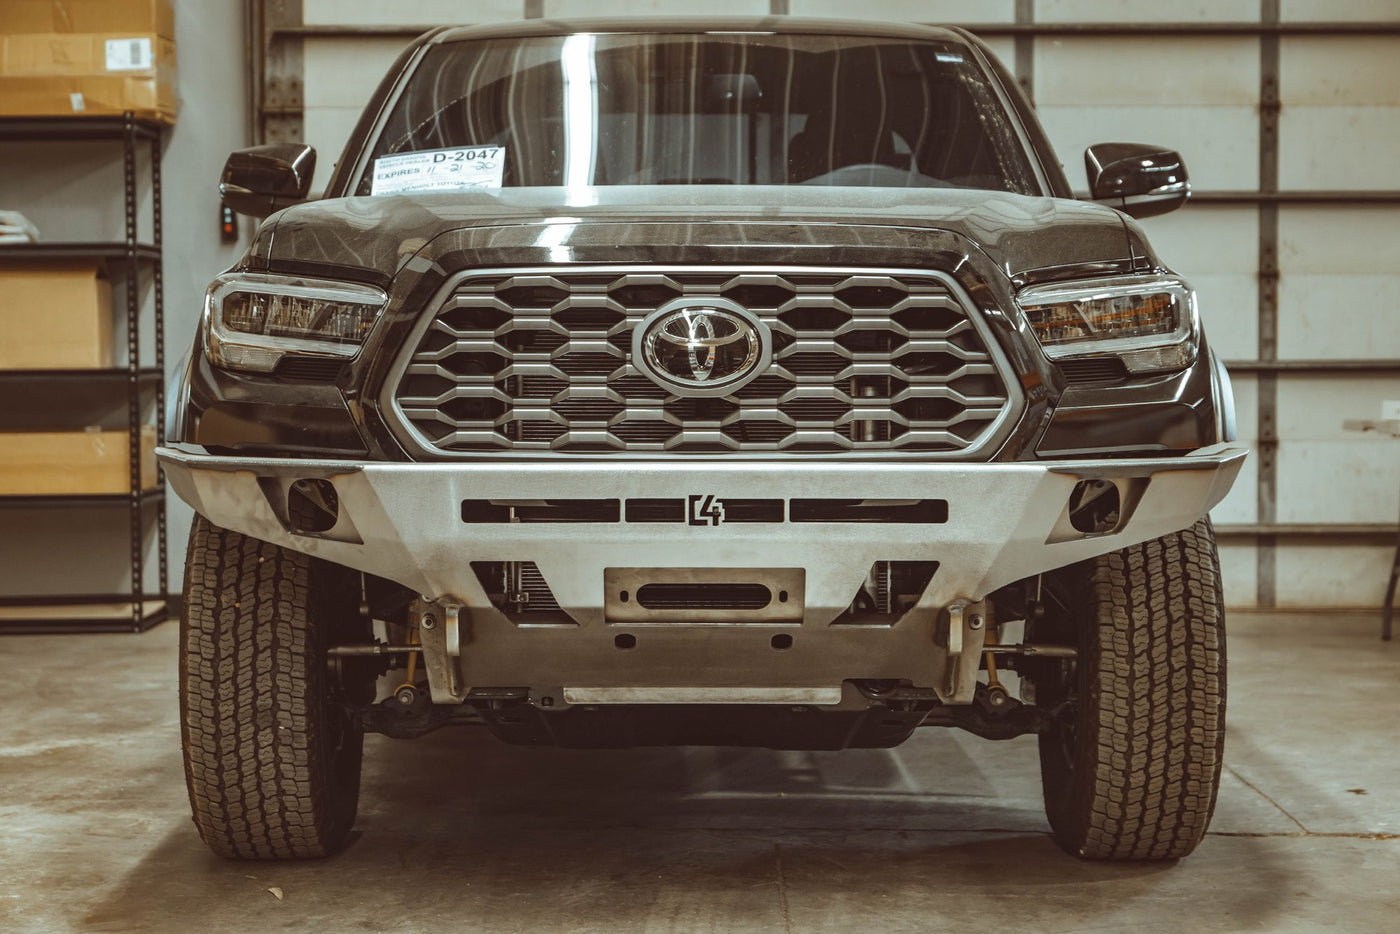 C4 Fabrication's 2016+ Tacoma Overland Front Bumper with No Bull Bar